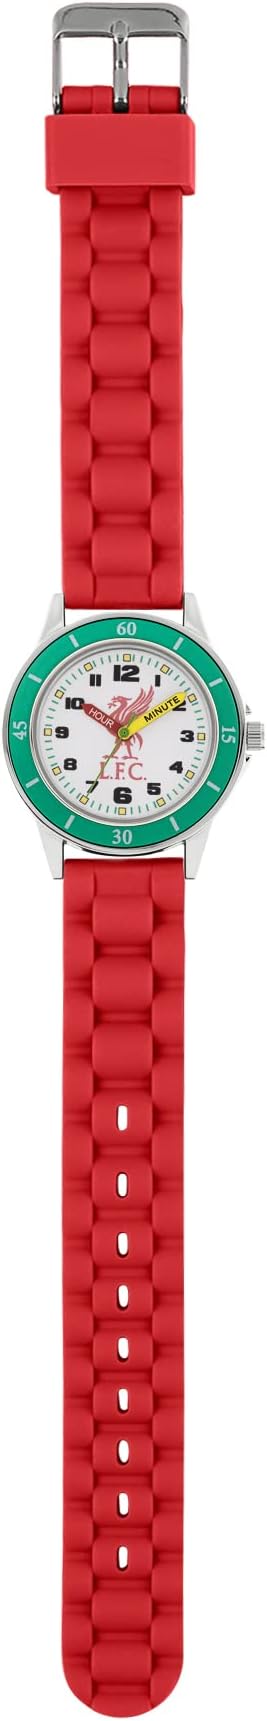 Peers Hardy - Official Liverpool FC Red Time Teacher Watch